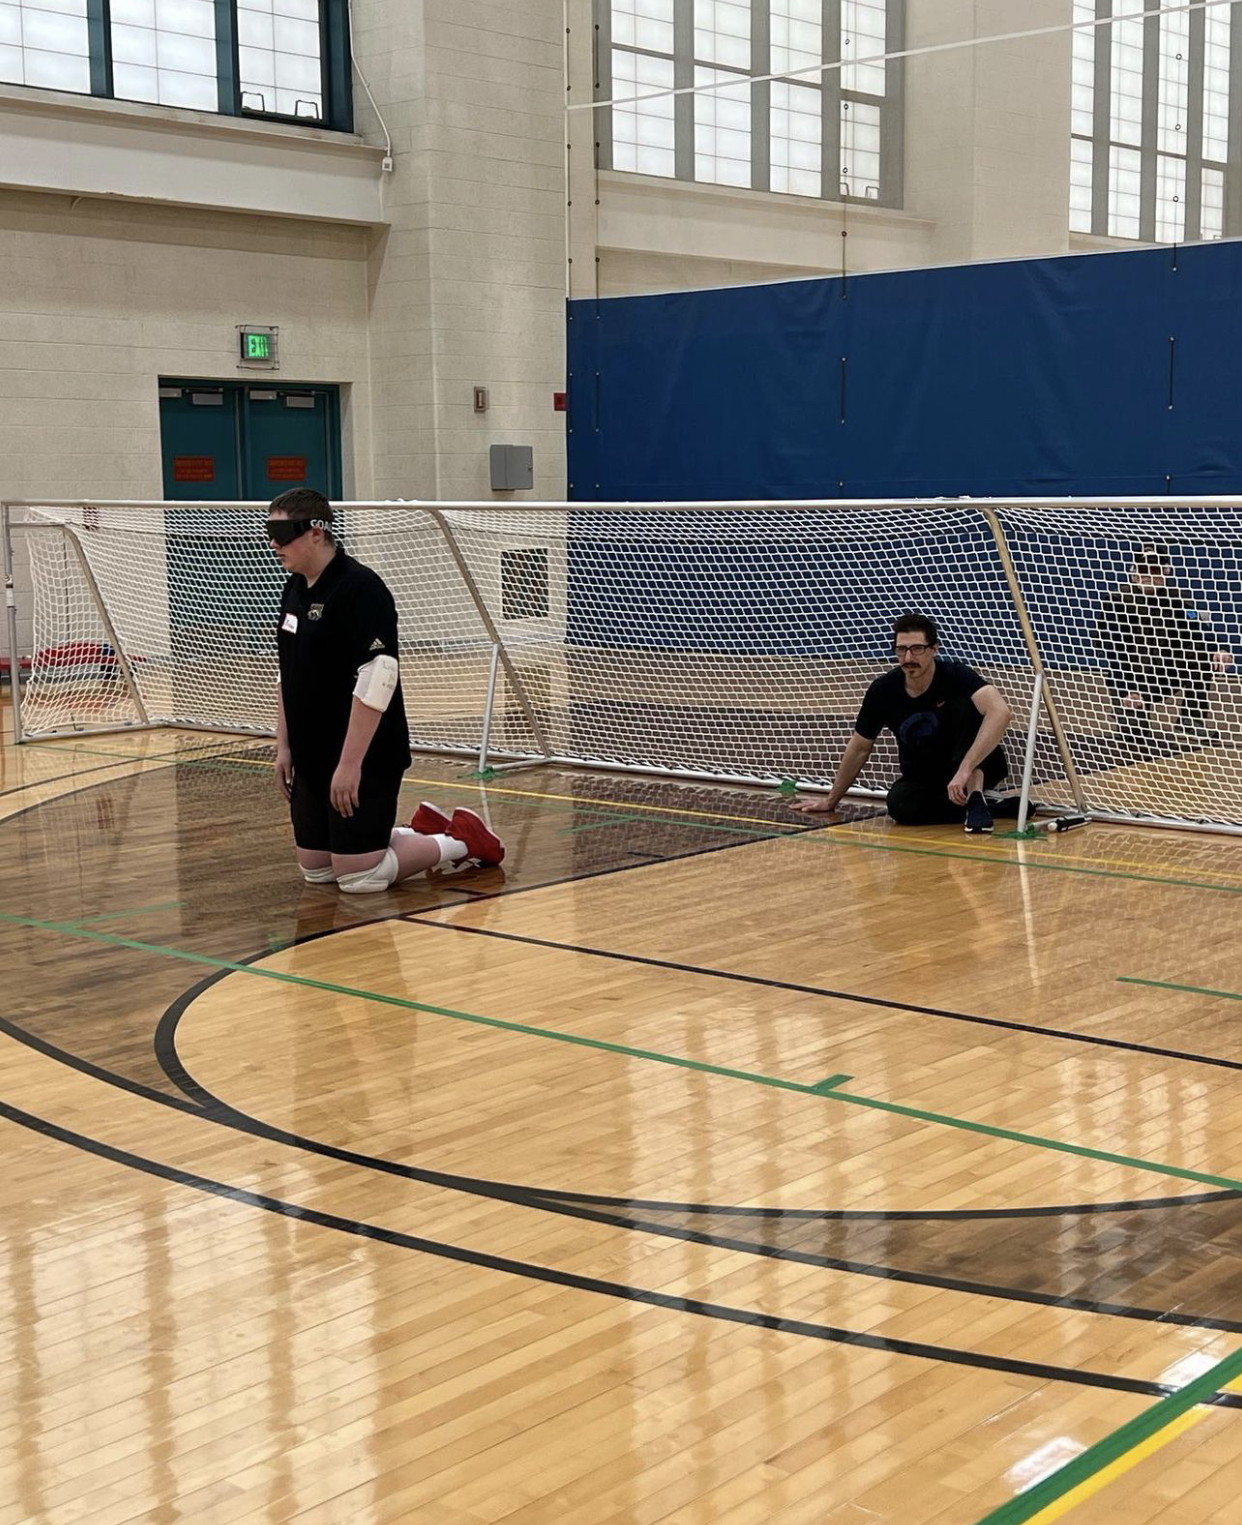 Kusku sits in the 30-foot-wide goal that players defend in the sport of goalball, invented for visually impaired athletes. 